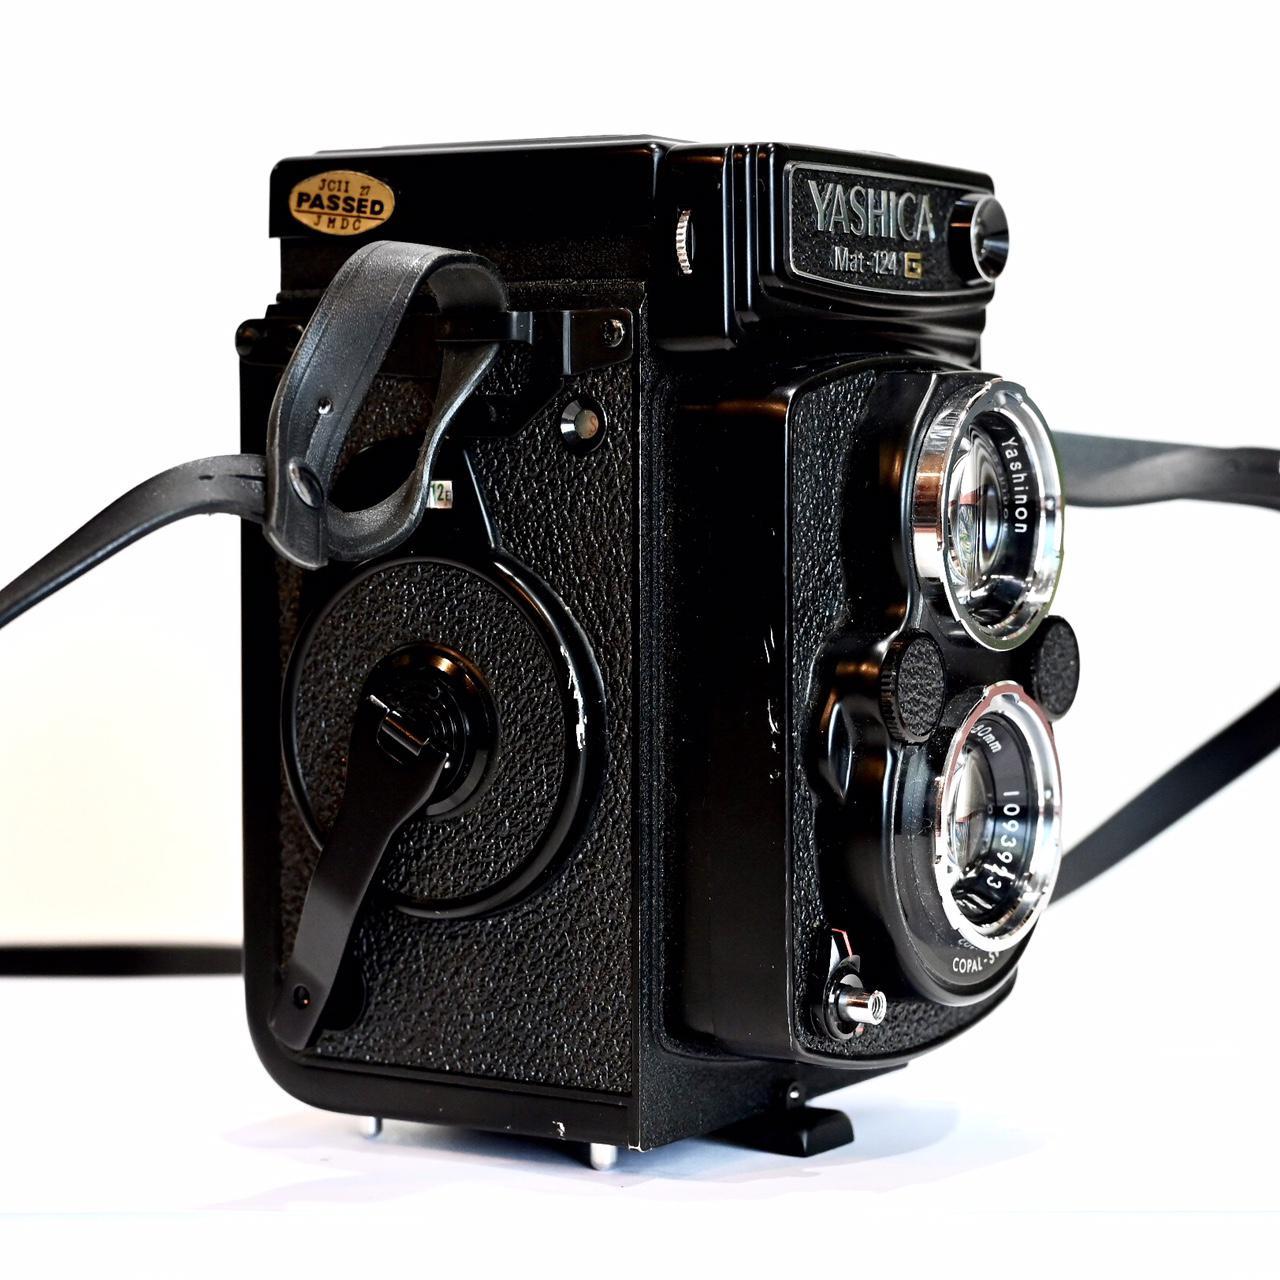 Yashica Black and Silver Cameras-and-accessories (2)